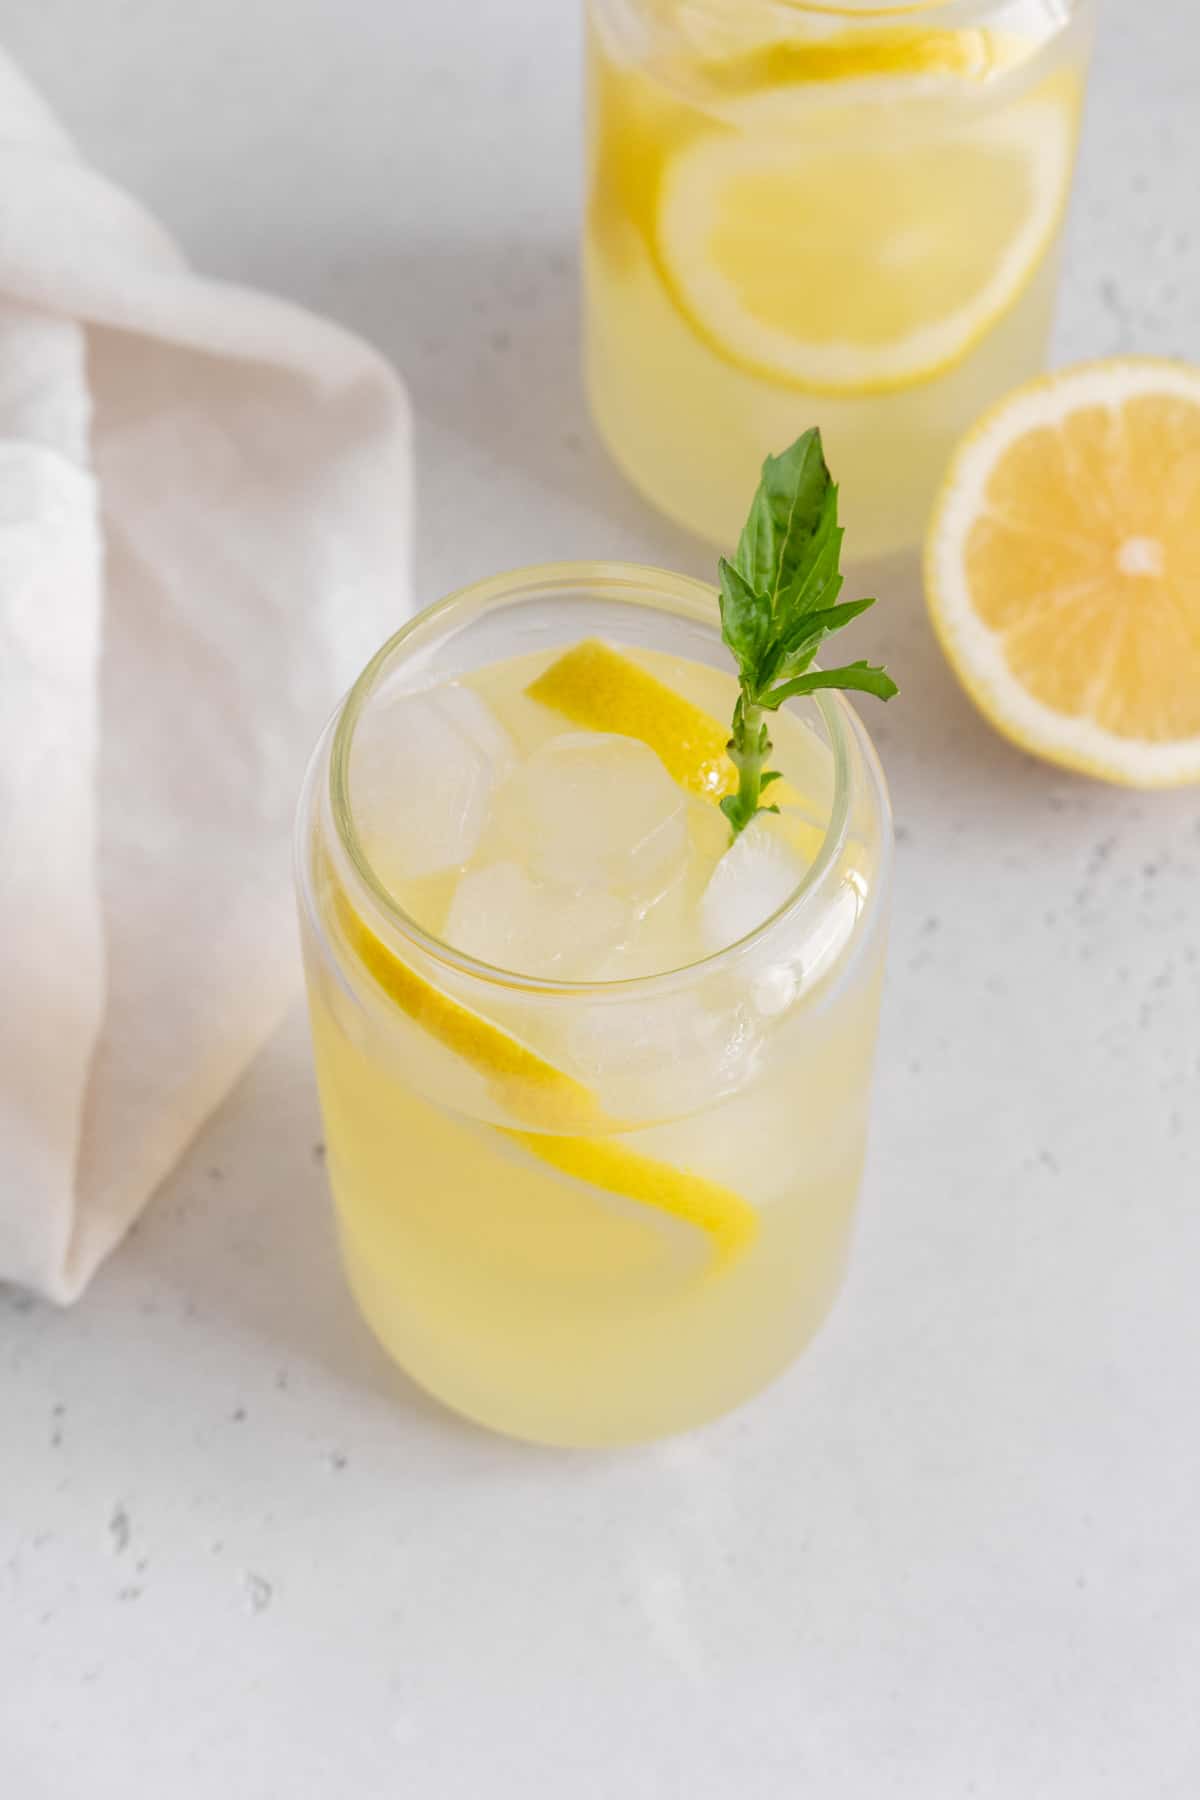 A glass of basil lemonade with basil garnish and a second glass with a cut lemon in the background.